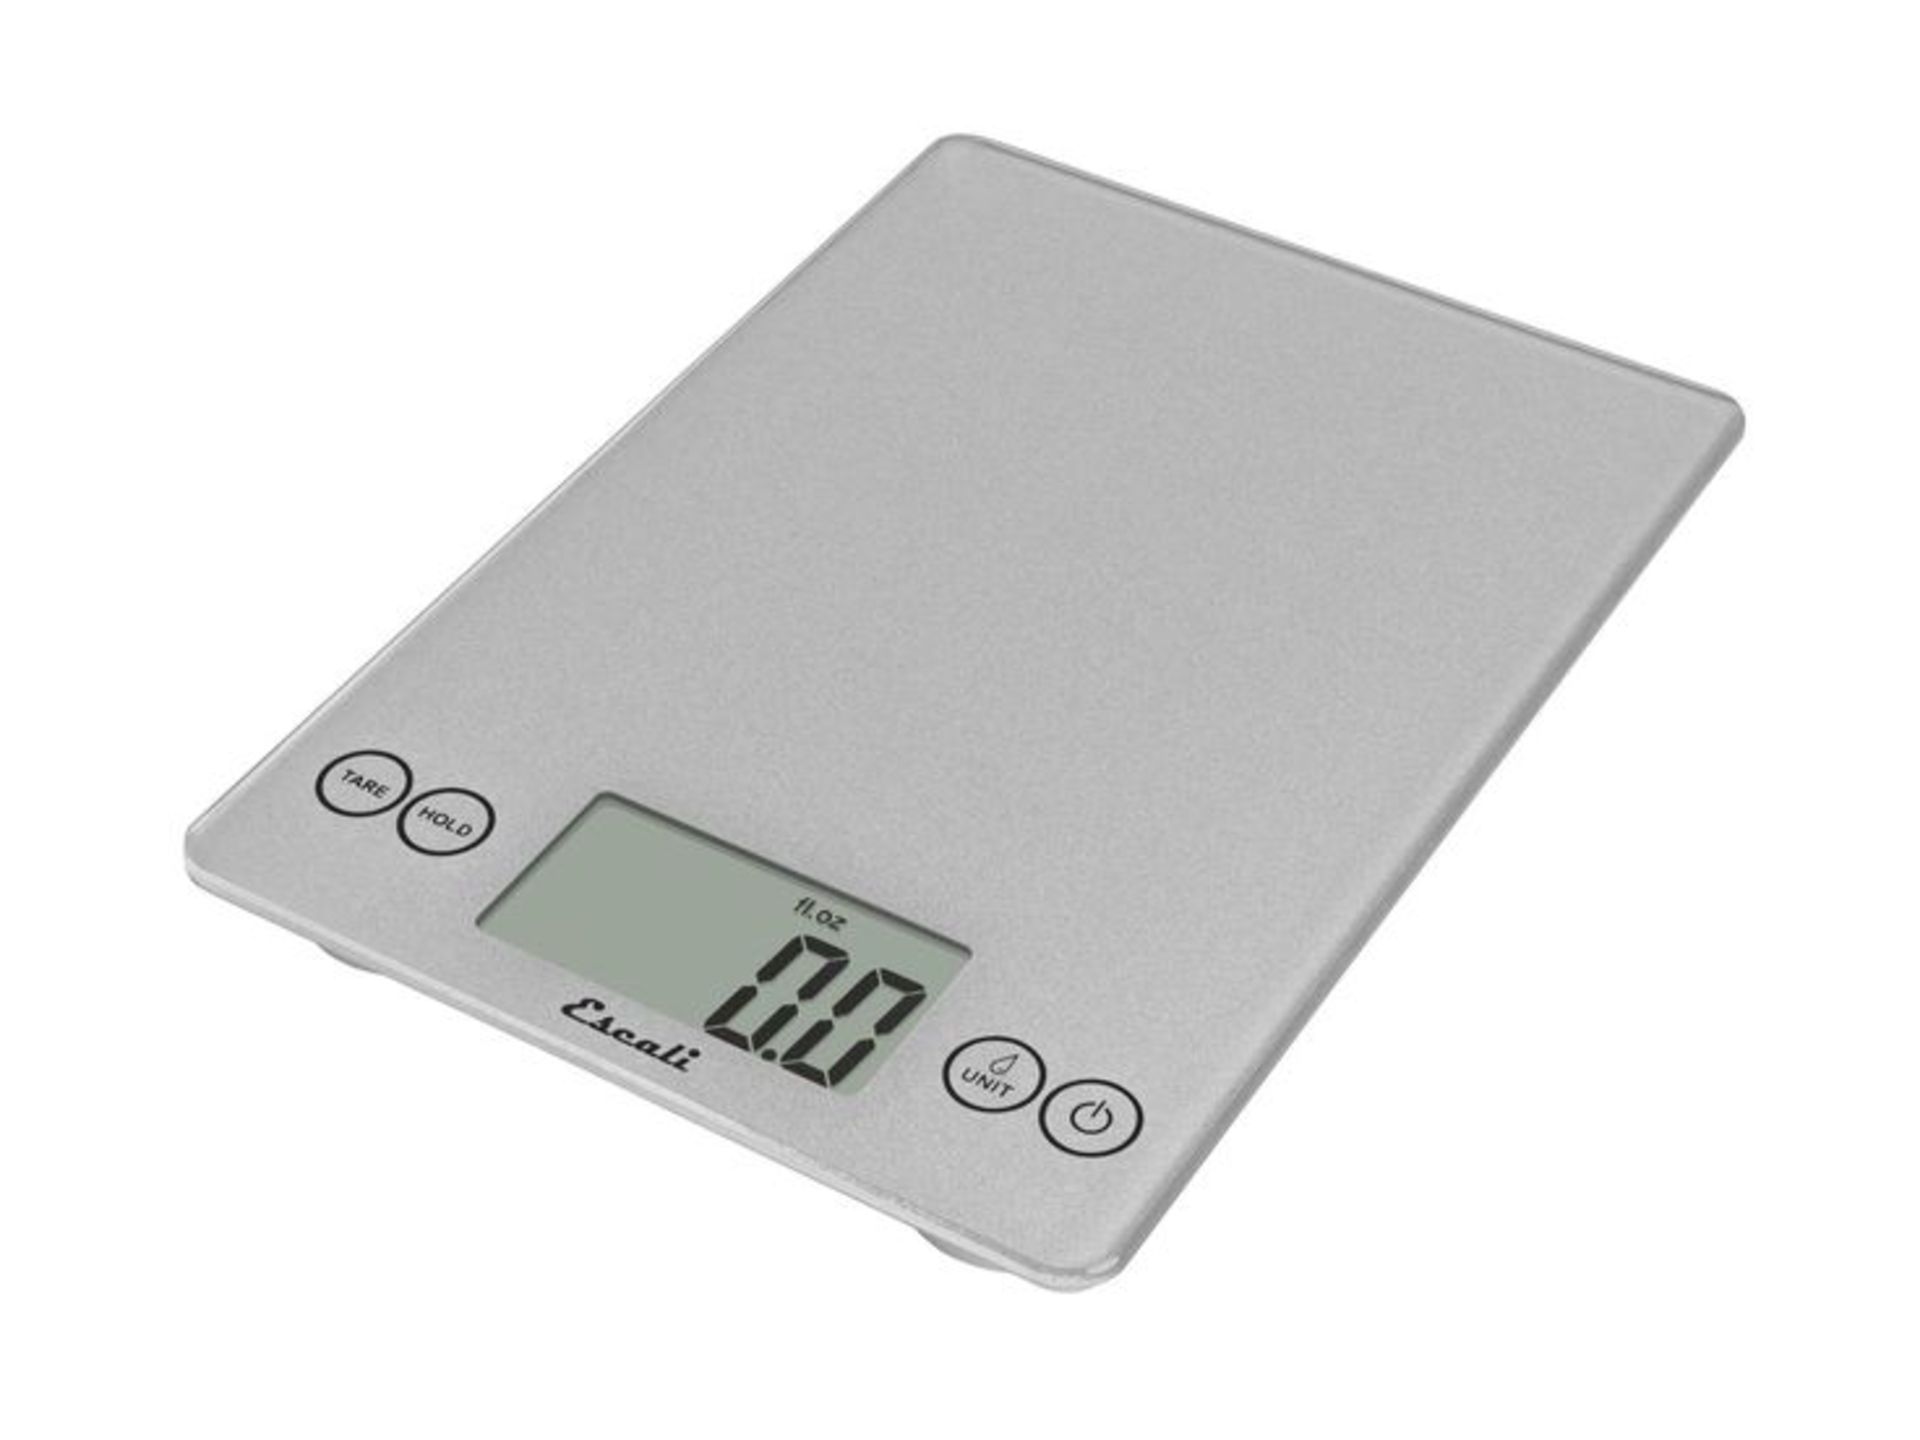 V Brand New Digital Kitchen Scales with Large LCD Display in lbs OZs and Grams (Styles may vary - Image 2 of 3